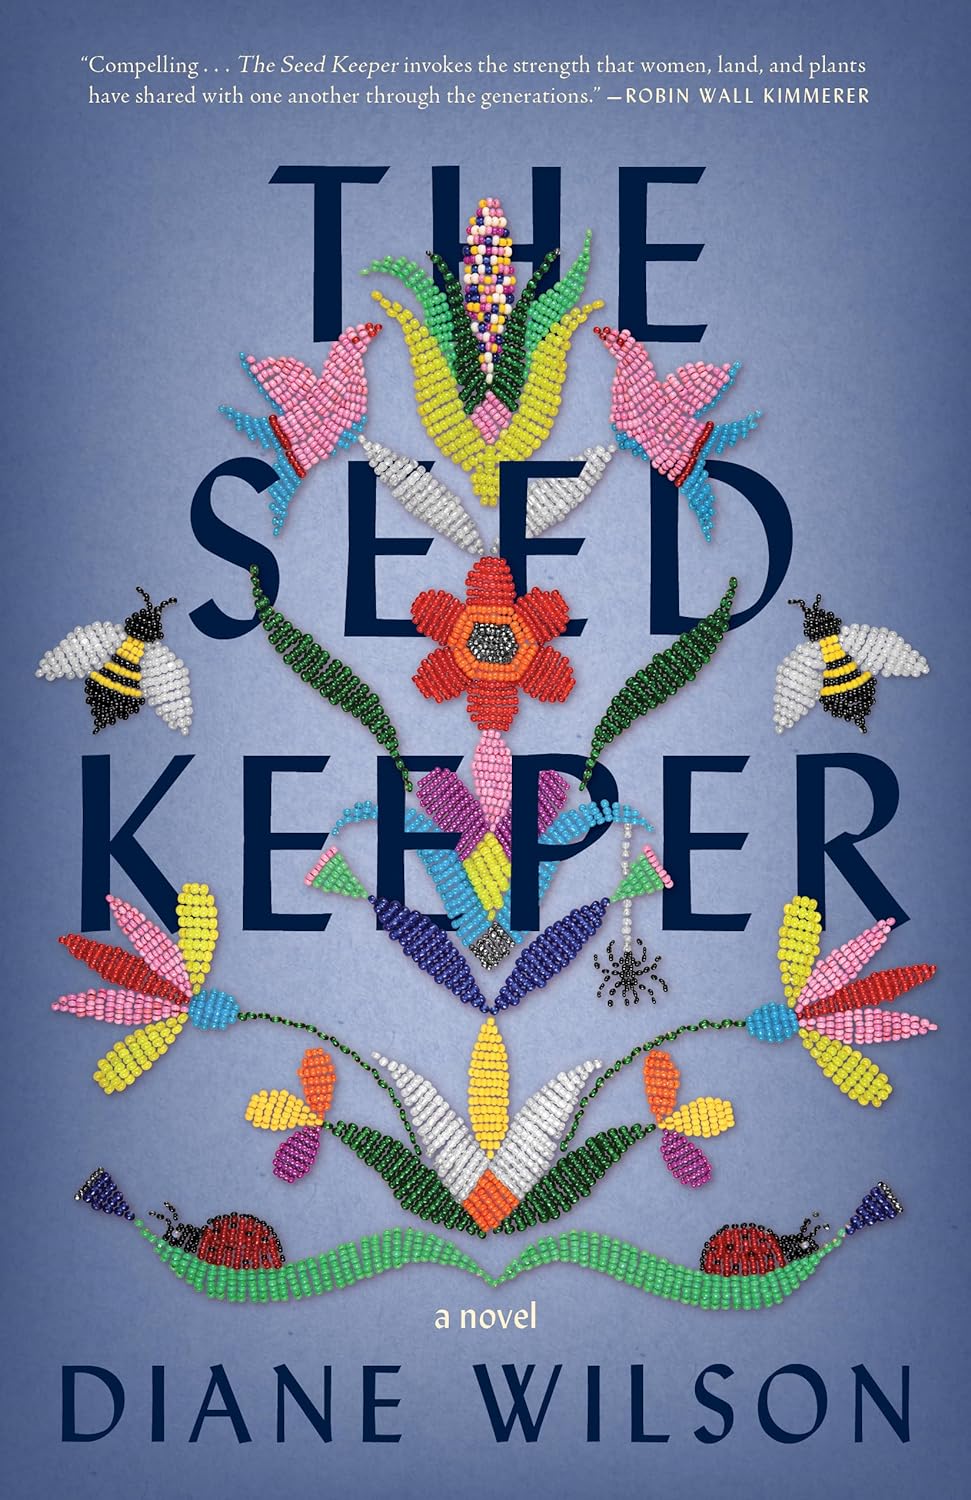 Image for "The Seed Keeper"